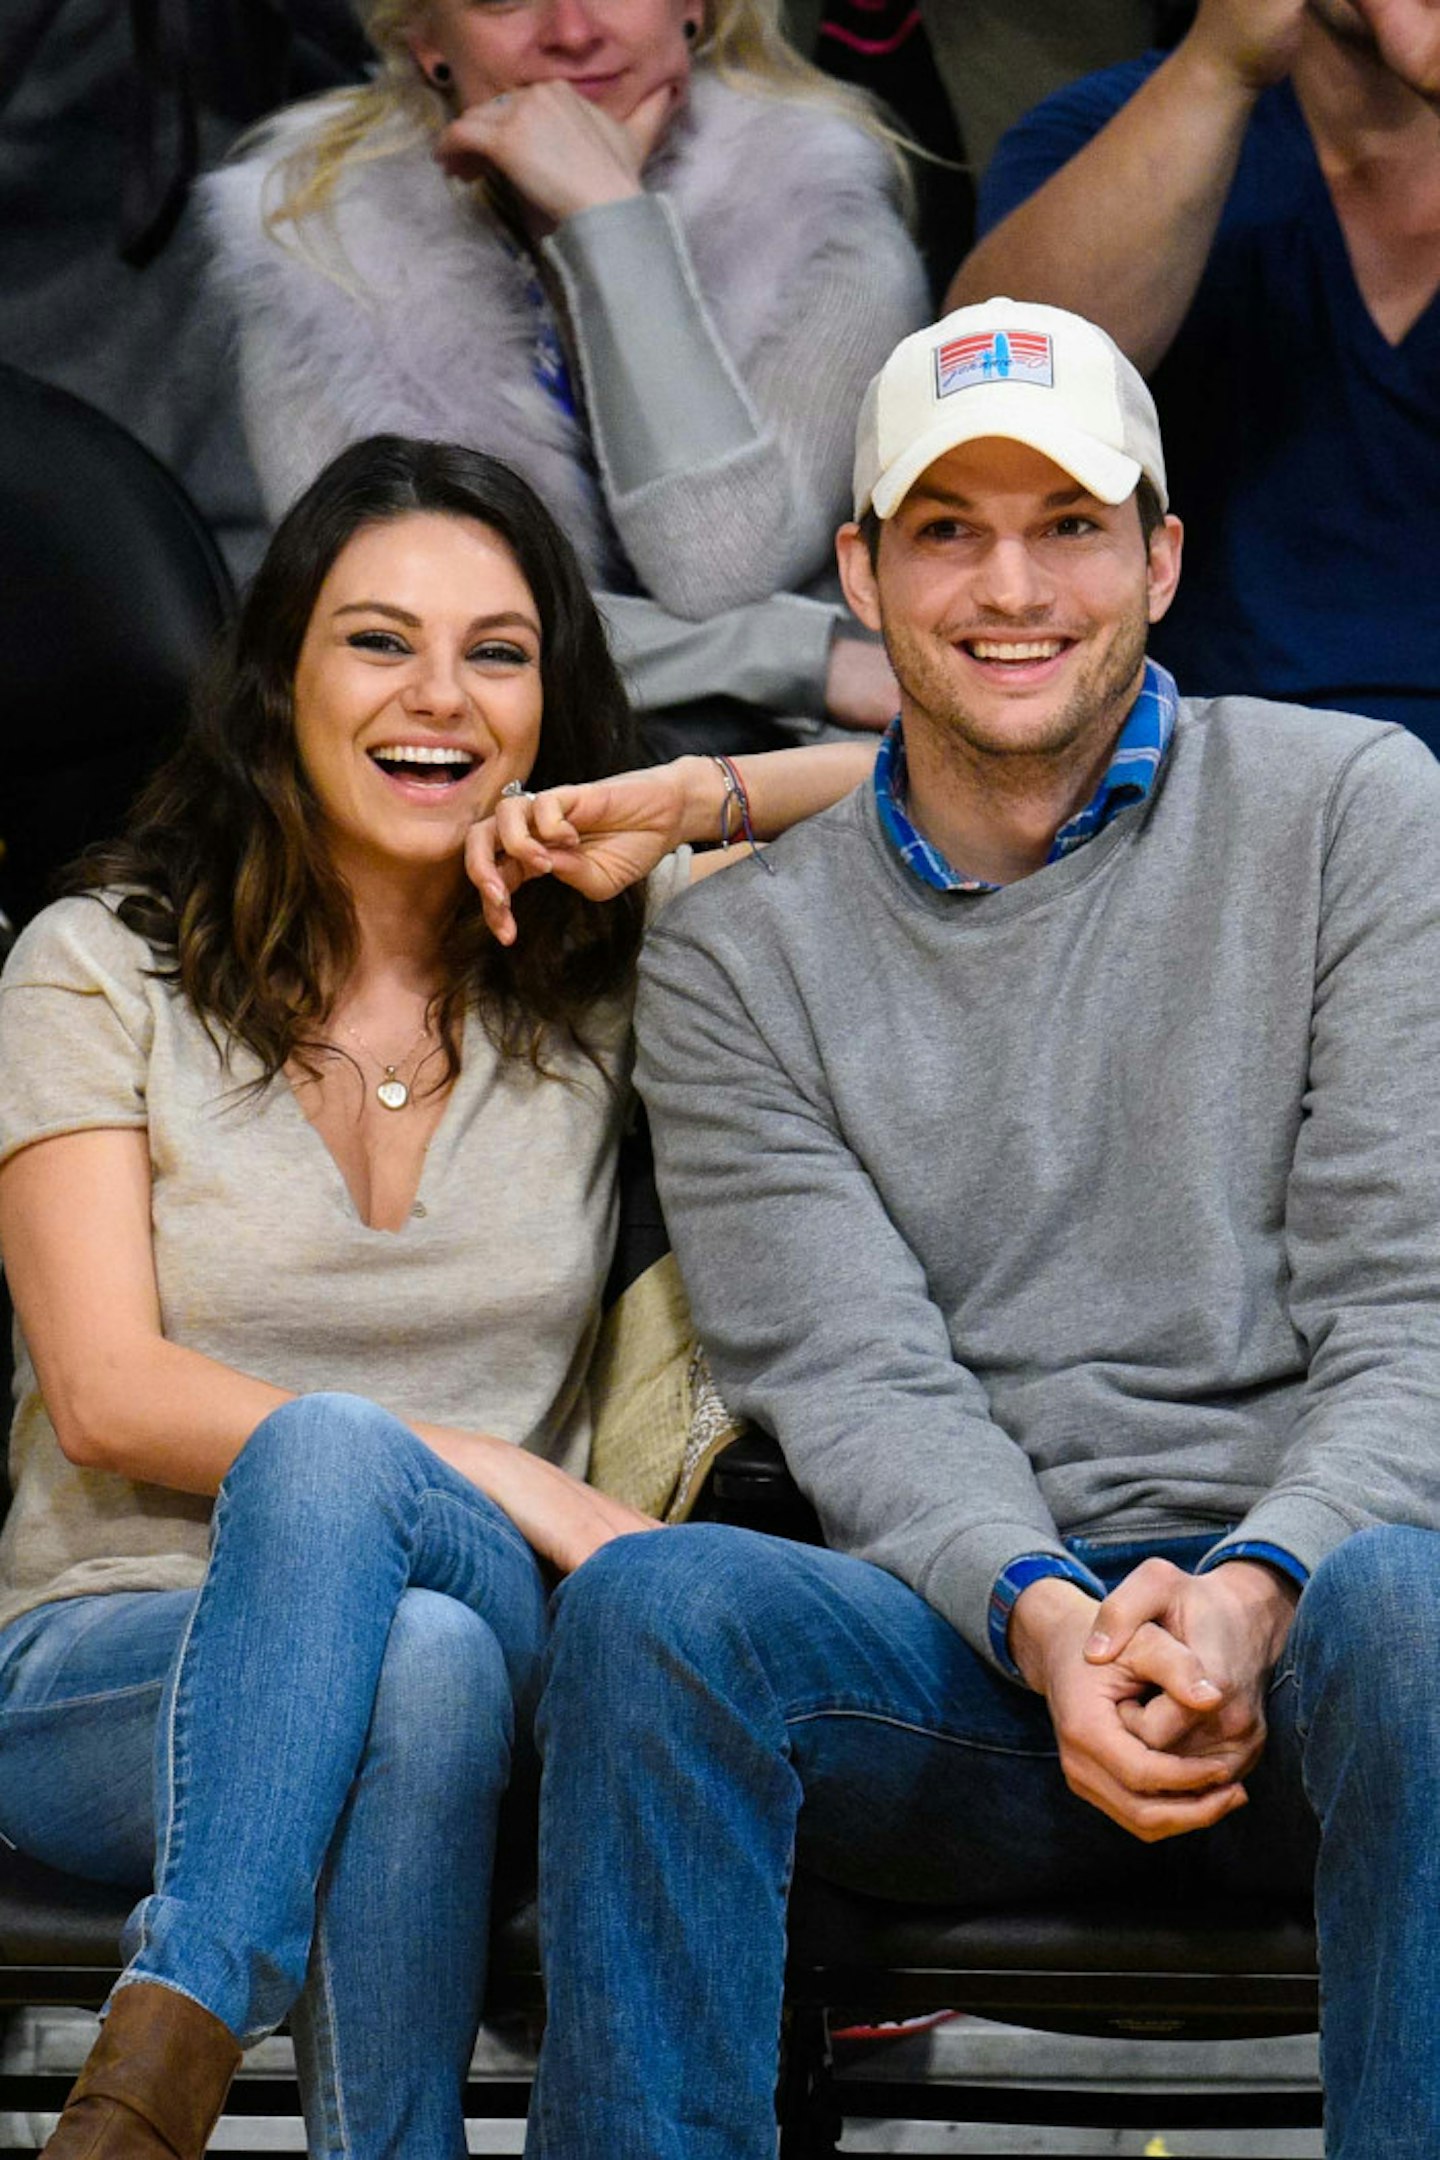 2014: Mila Kunis and Ashton Kutcher at the Los Angeles Lakers Game